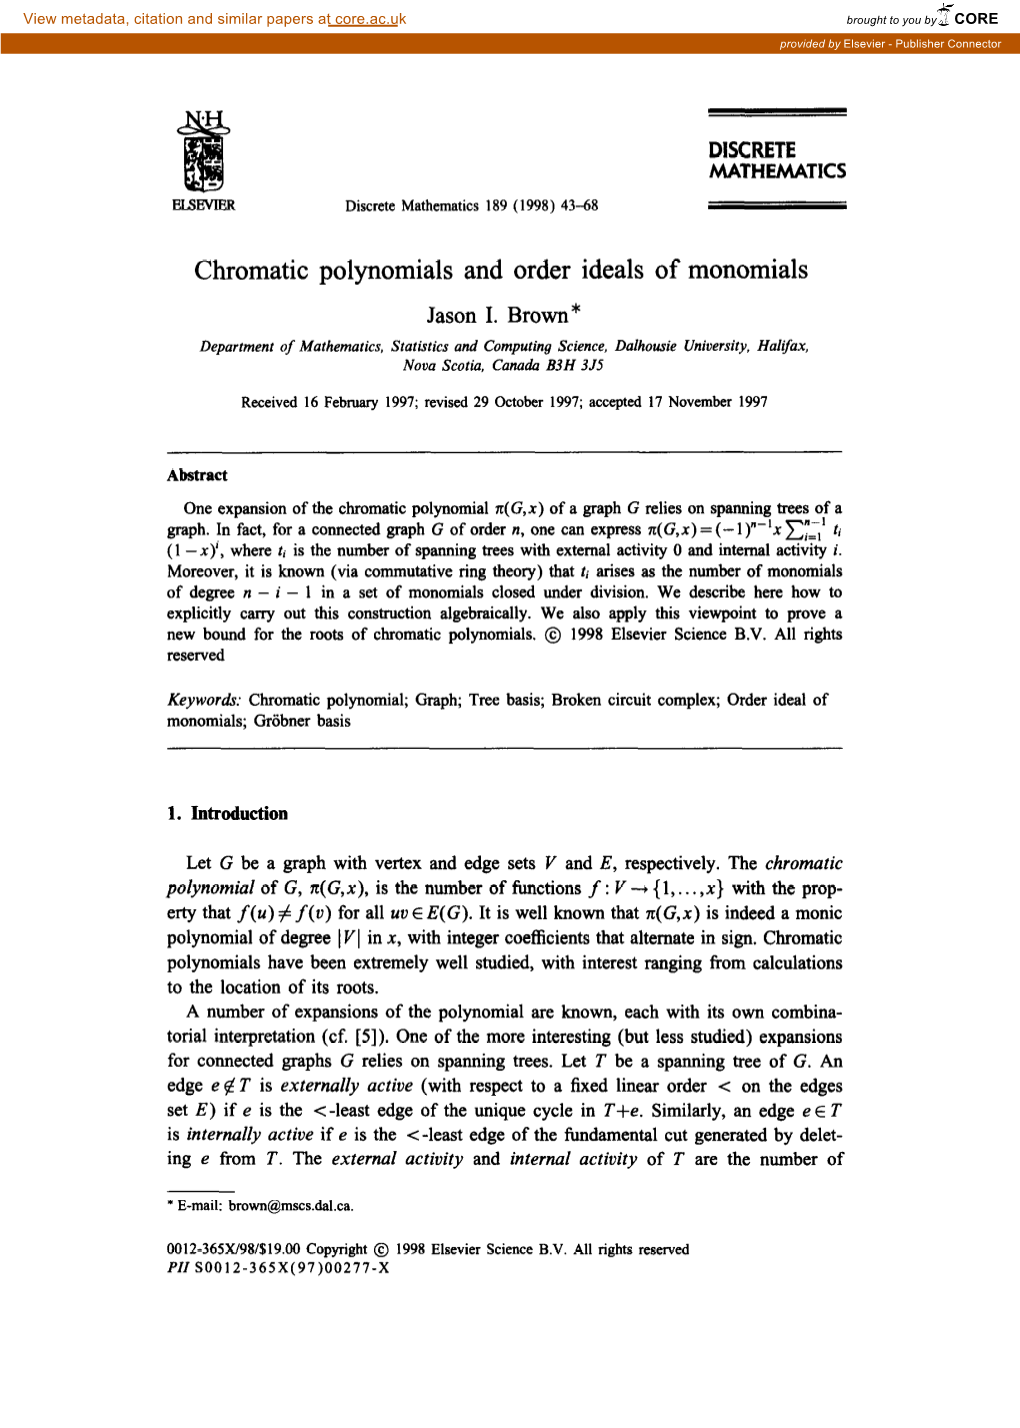 Chromatic Polynomials and Order Ideals of Monomials